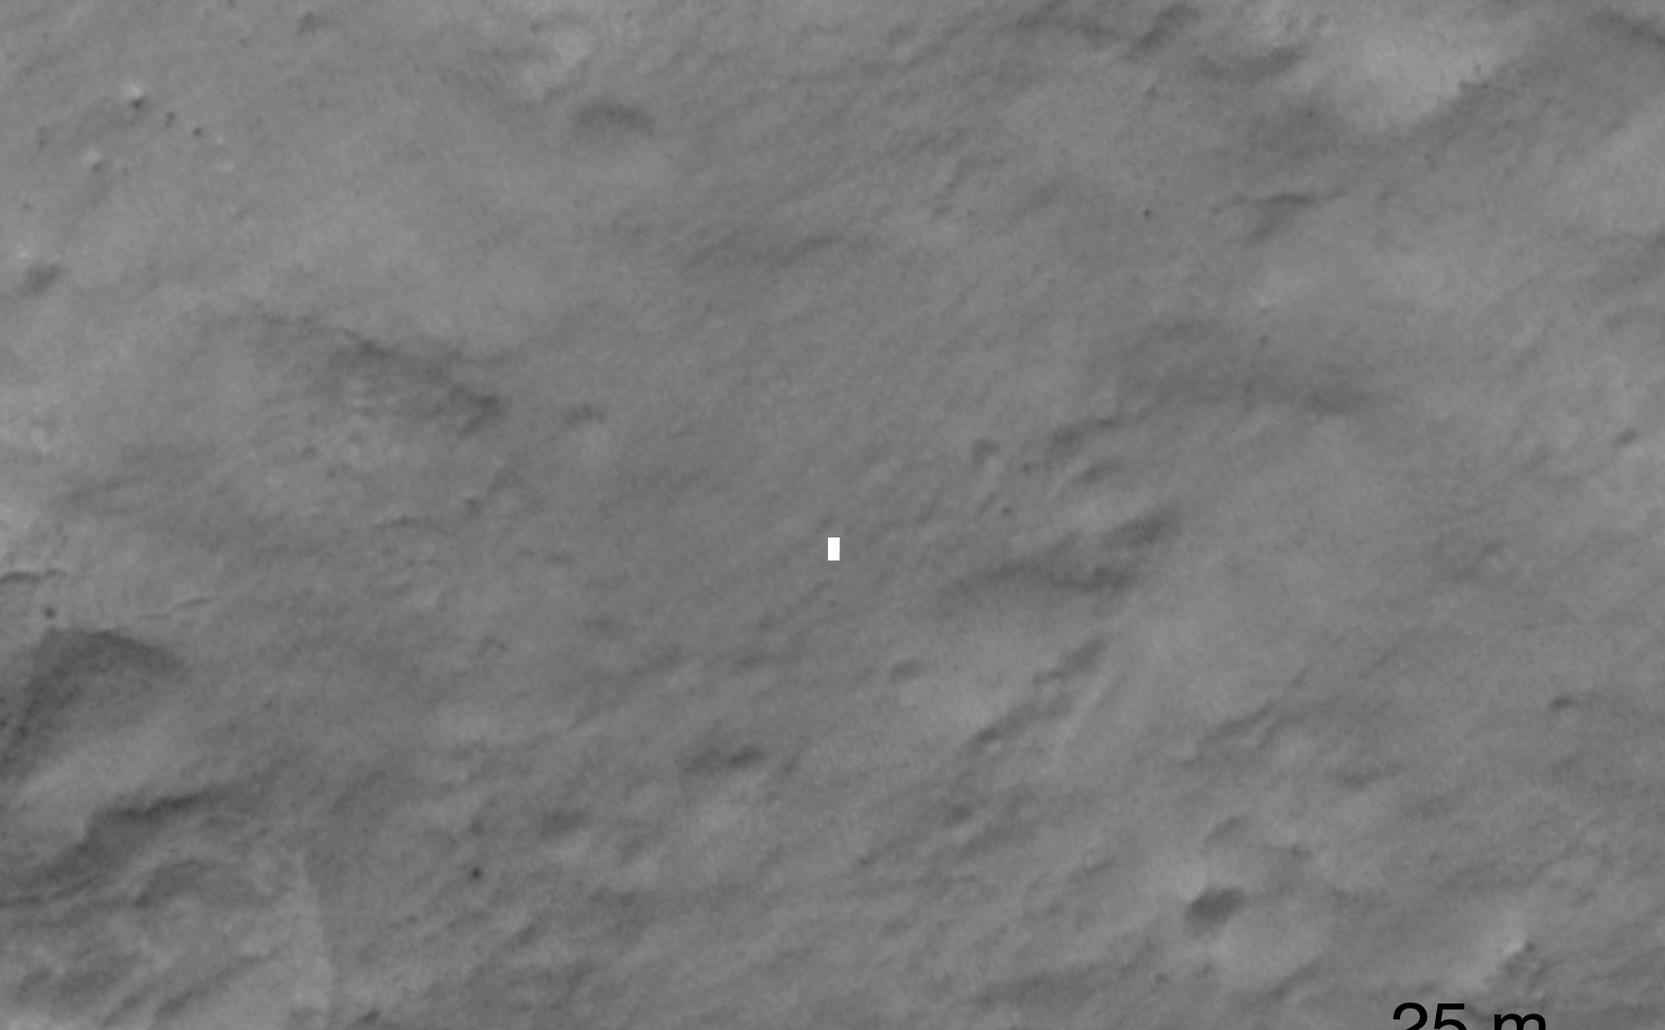 This set of images compares a black-and-white image from the High Resolution Imaging Science Experiment (HiRISE) aboard NASA's Mars Reconnaissance Orbiter to a color image obtained by the Mars Descent Imager aboard NASA's Curiosity rover during its descent to the surface.